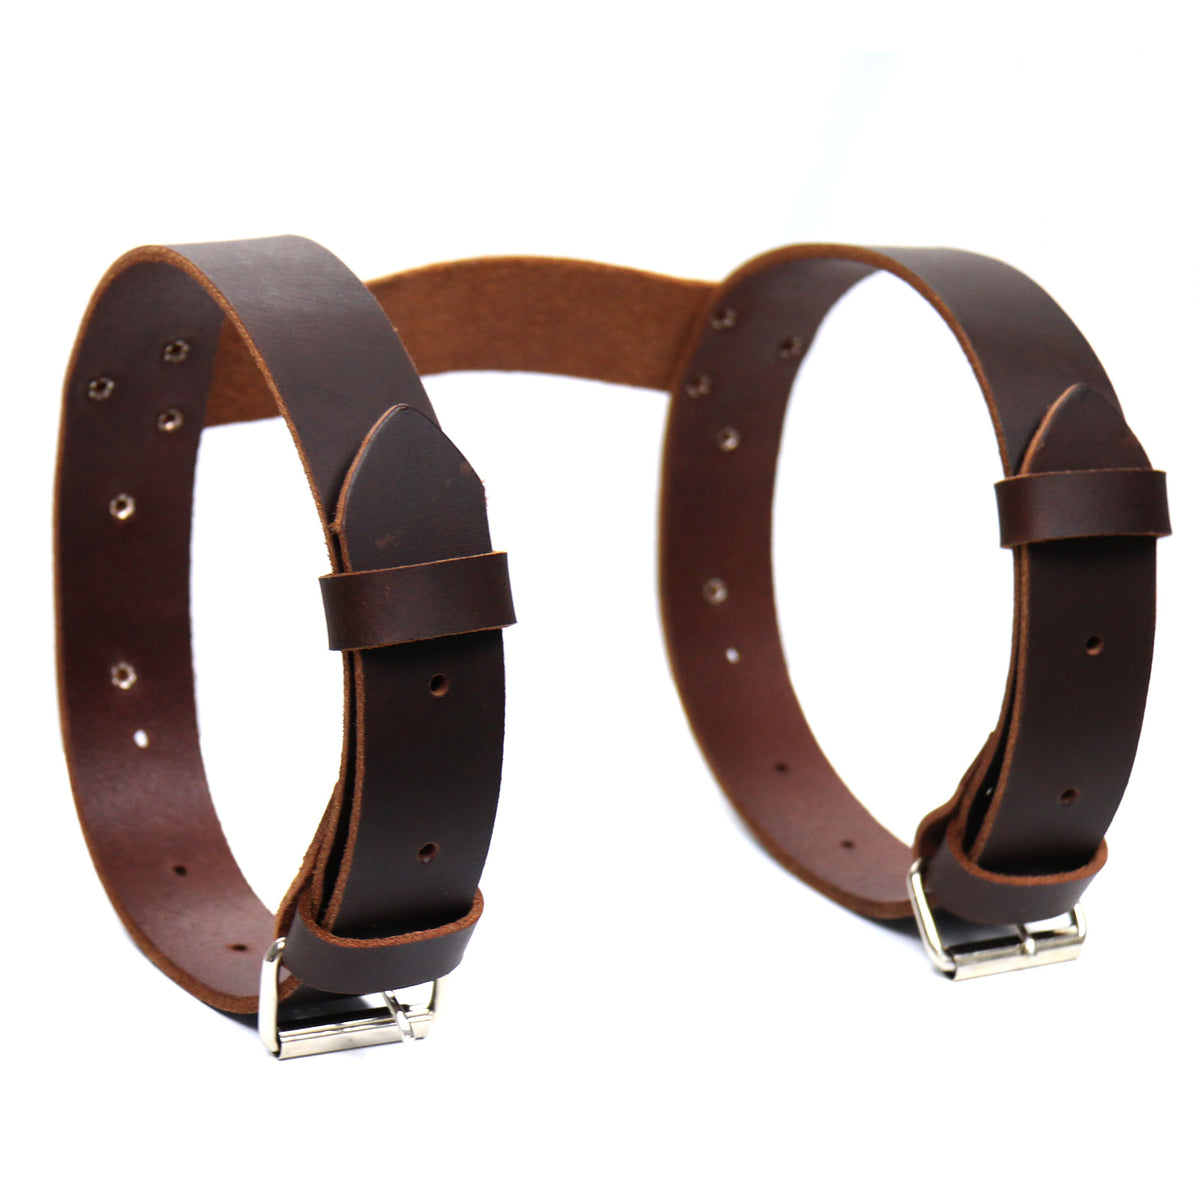 Hot Leathers Blanket Roll Brown Leather Strap